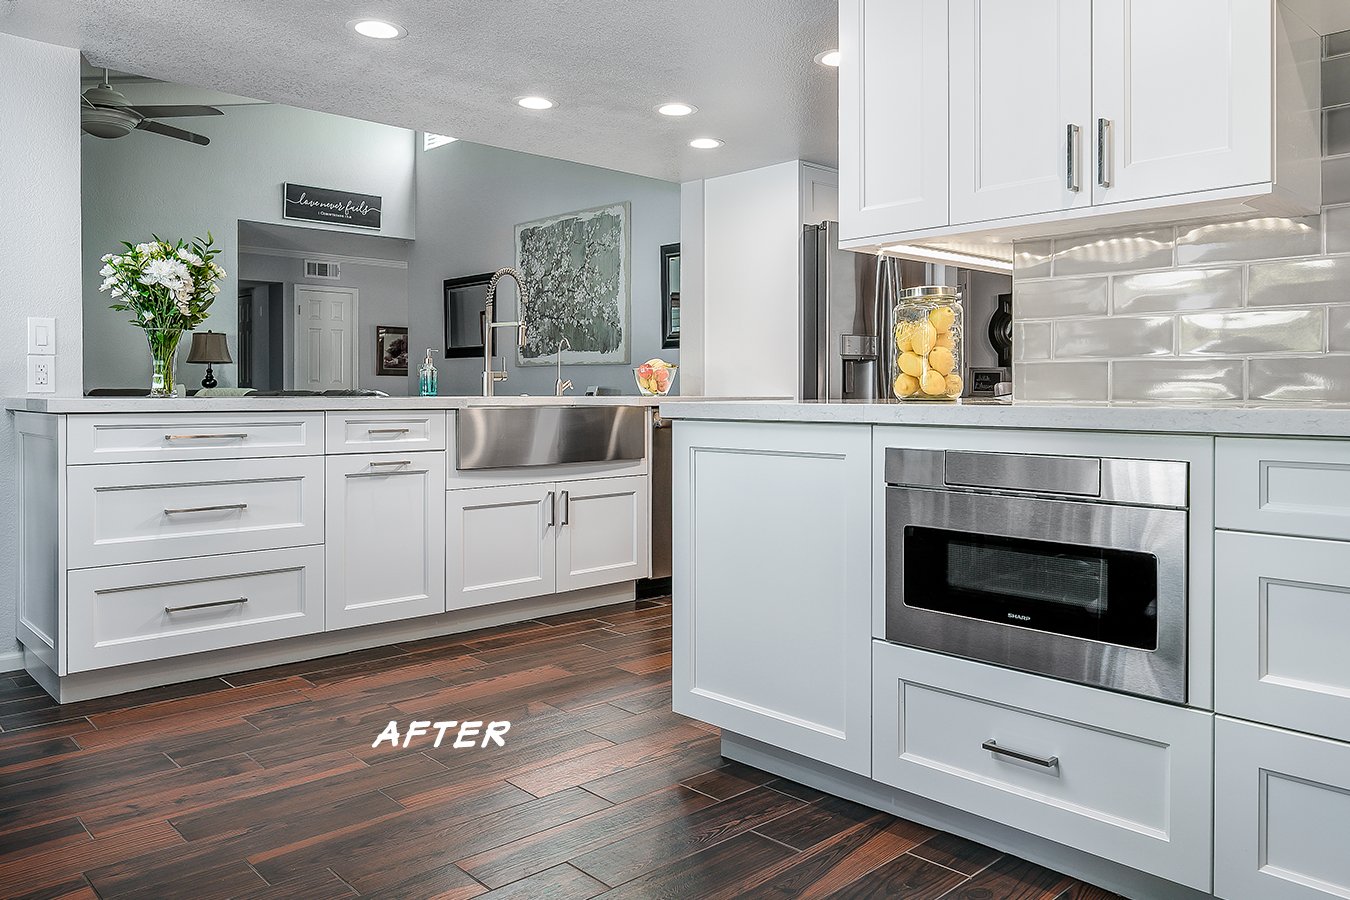 tempe design-build kitchen remodel contractor, hochuli design and remodeling team